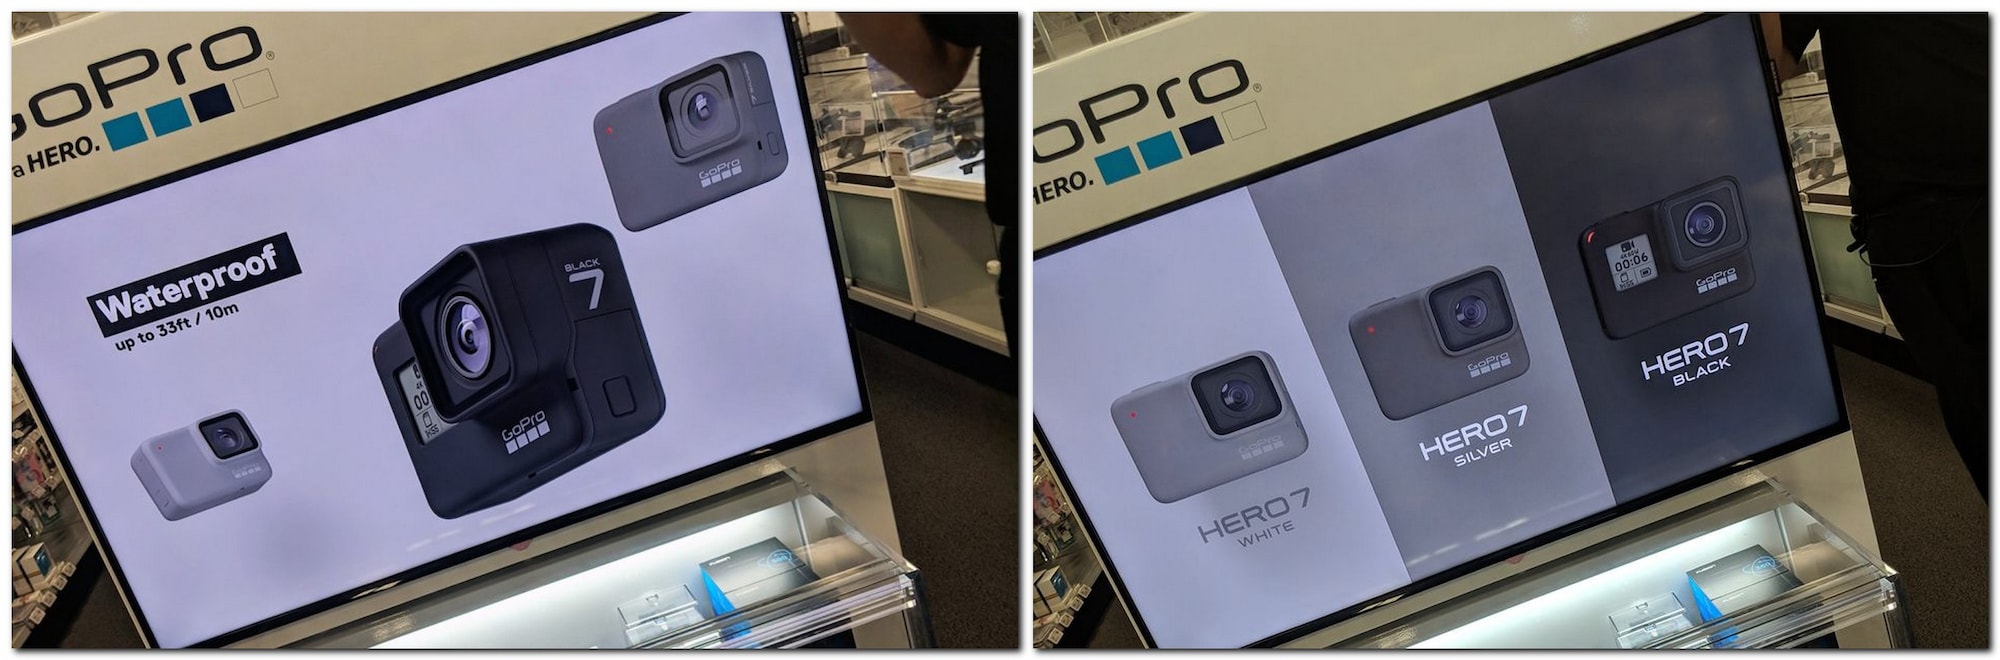 Gopro Hero 7 Variants Leaked At An In Store Display Ahead Of Expected Launch Technology News Firstpost